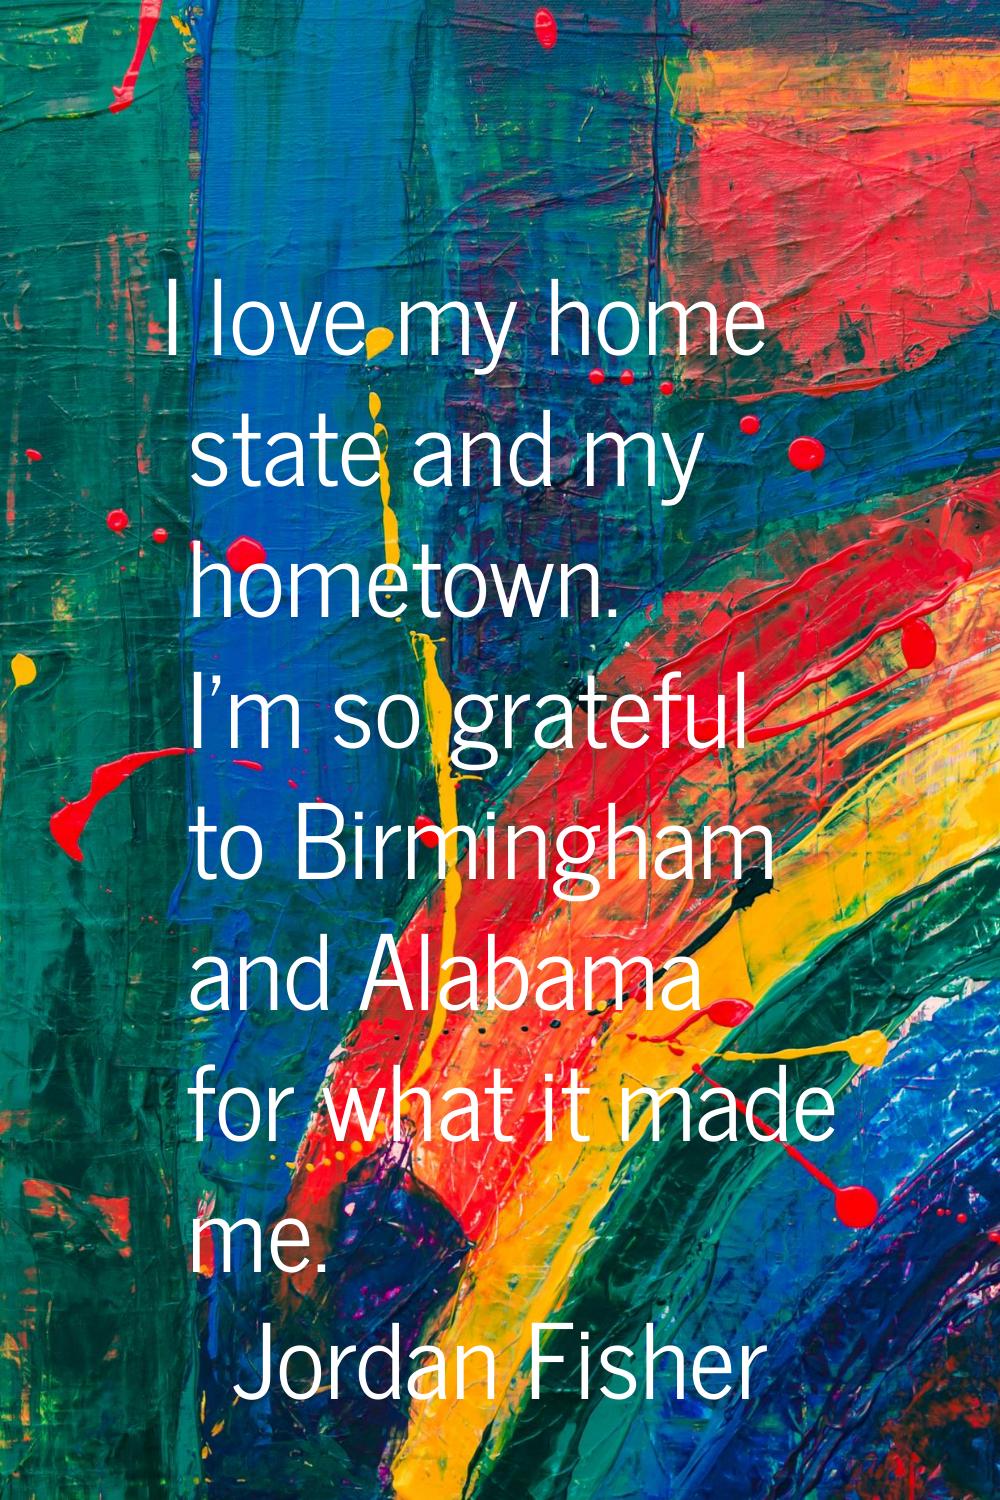 I love my home state and my hometown. I'm so grateful to Birmingham and Alabama for what it made me